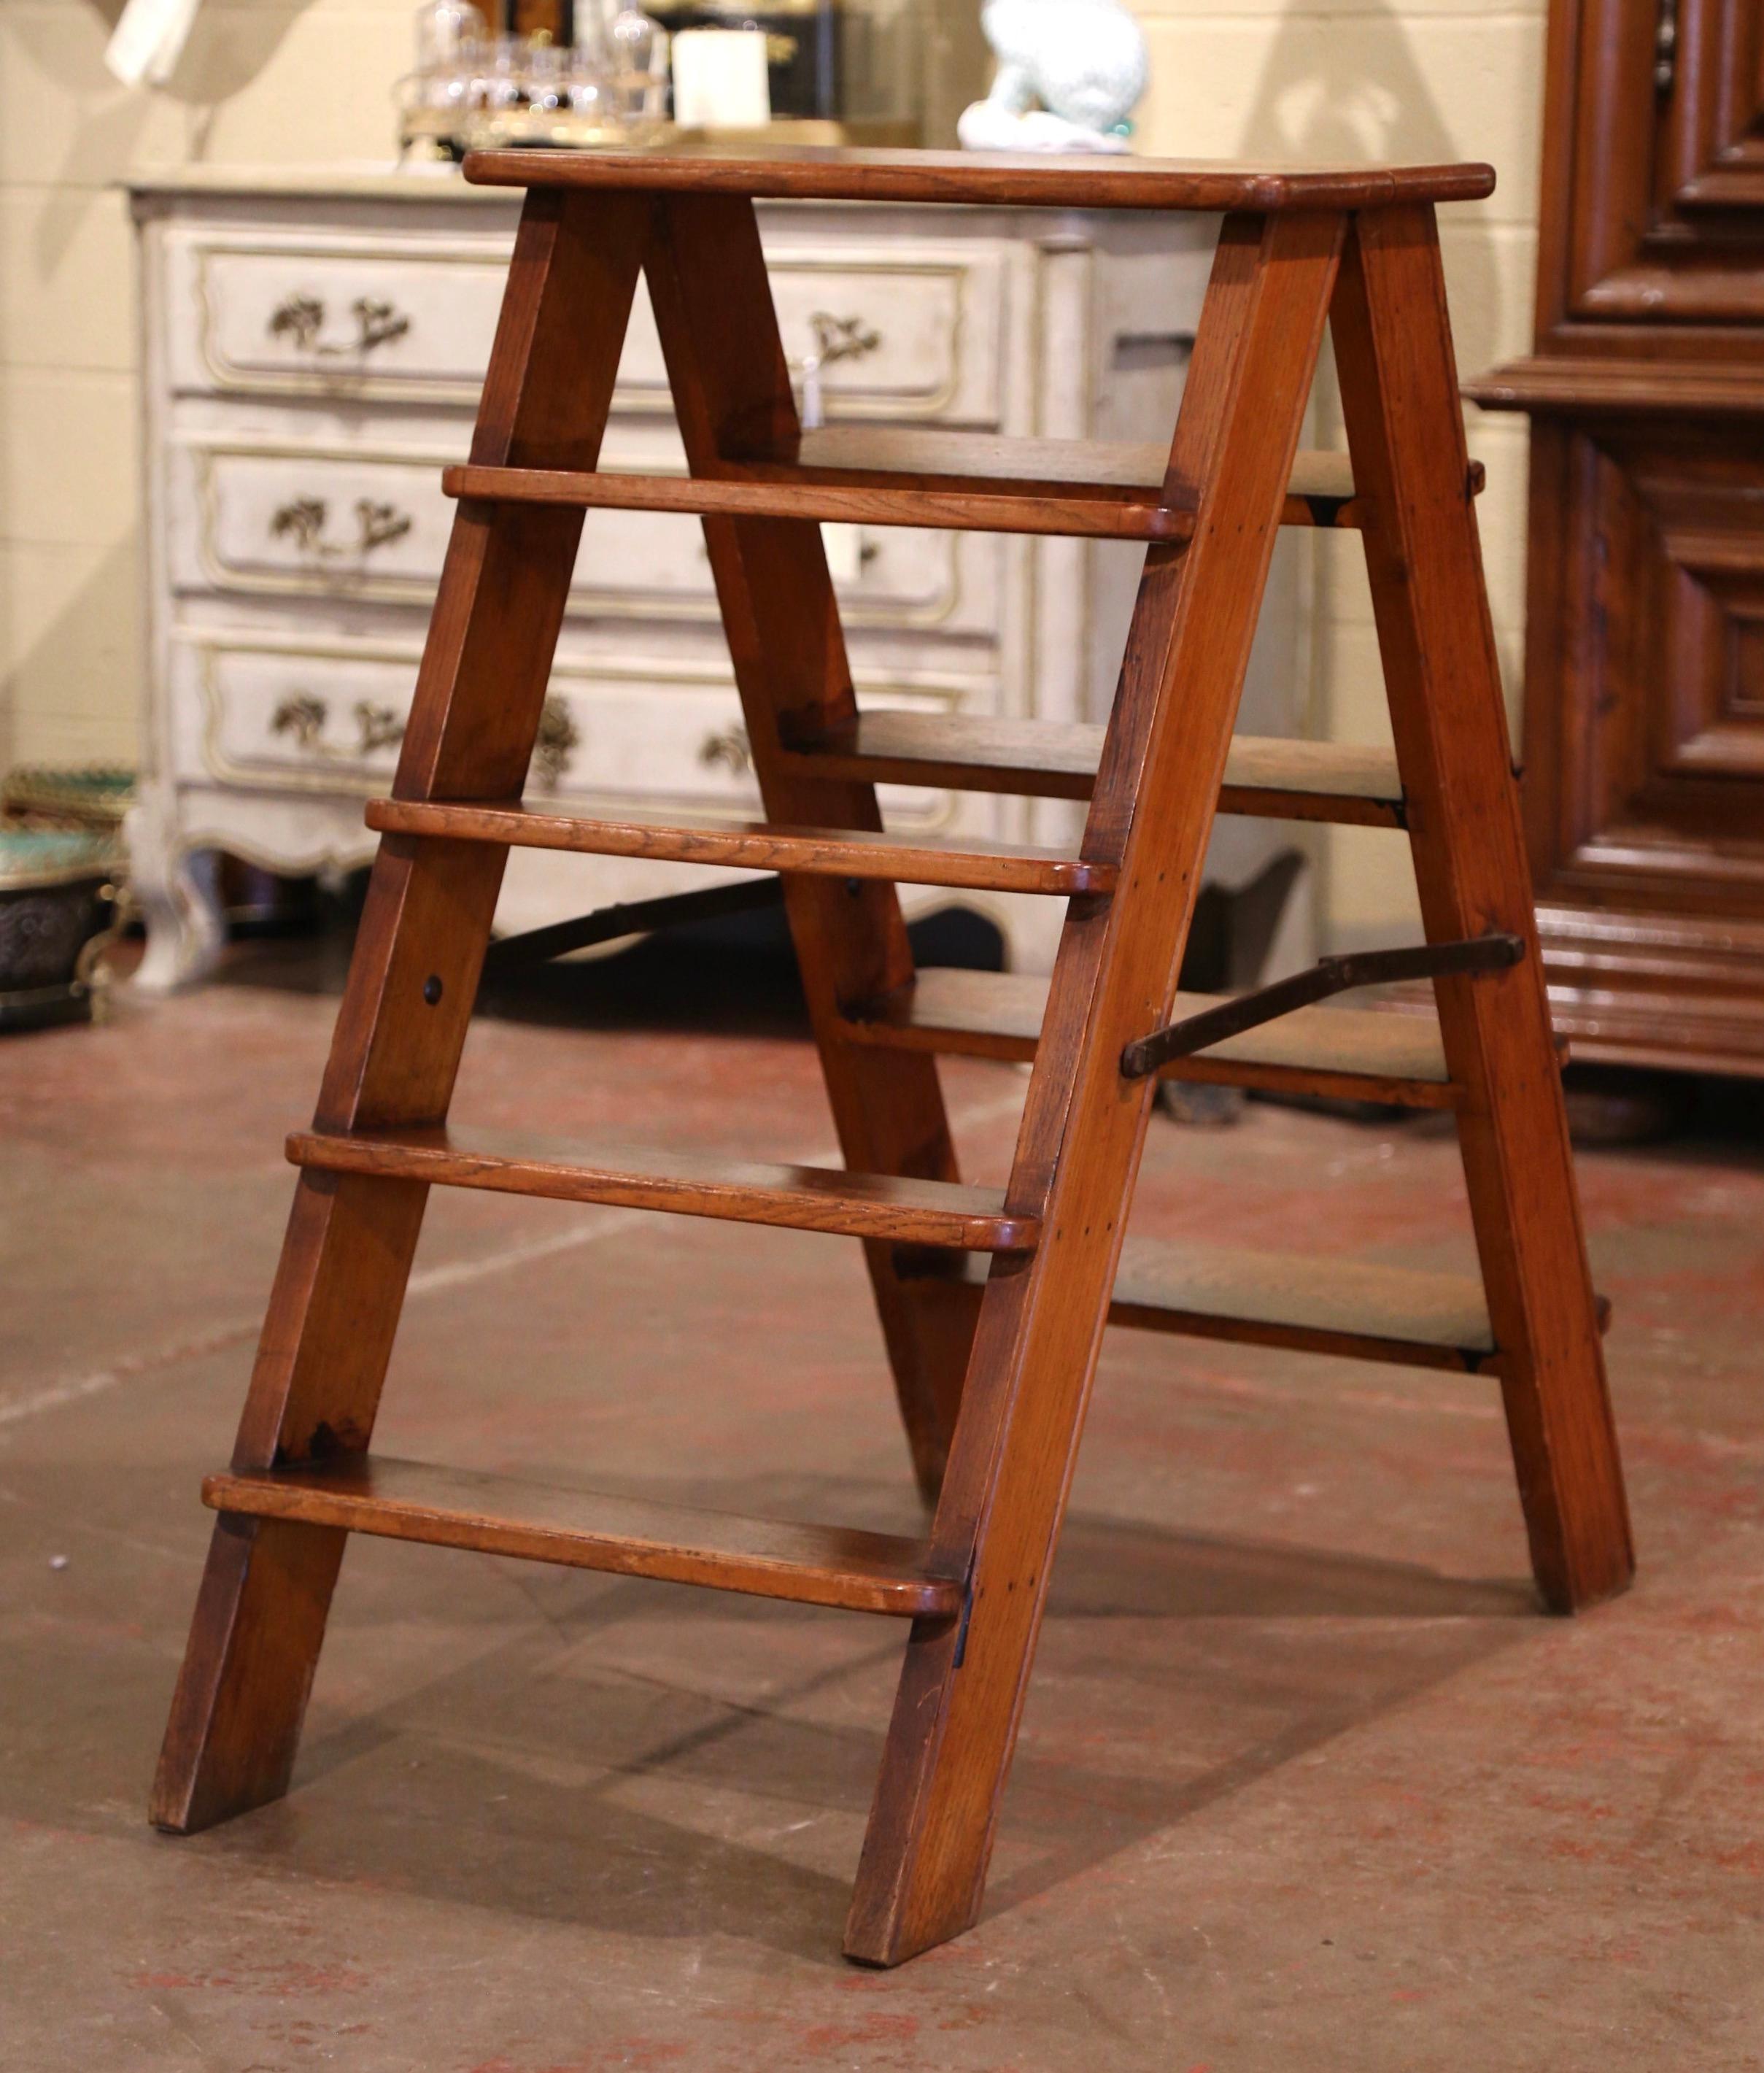 This elegant antique step ladder was created in France, circa 1850. Made of solid oak and folding iron mechanism, the sturdy ladder features four steps on both sides and a flat joined step at the top. Practical and useful, the ladder can folded and